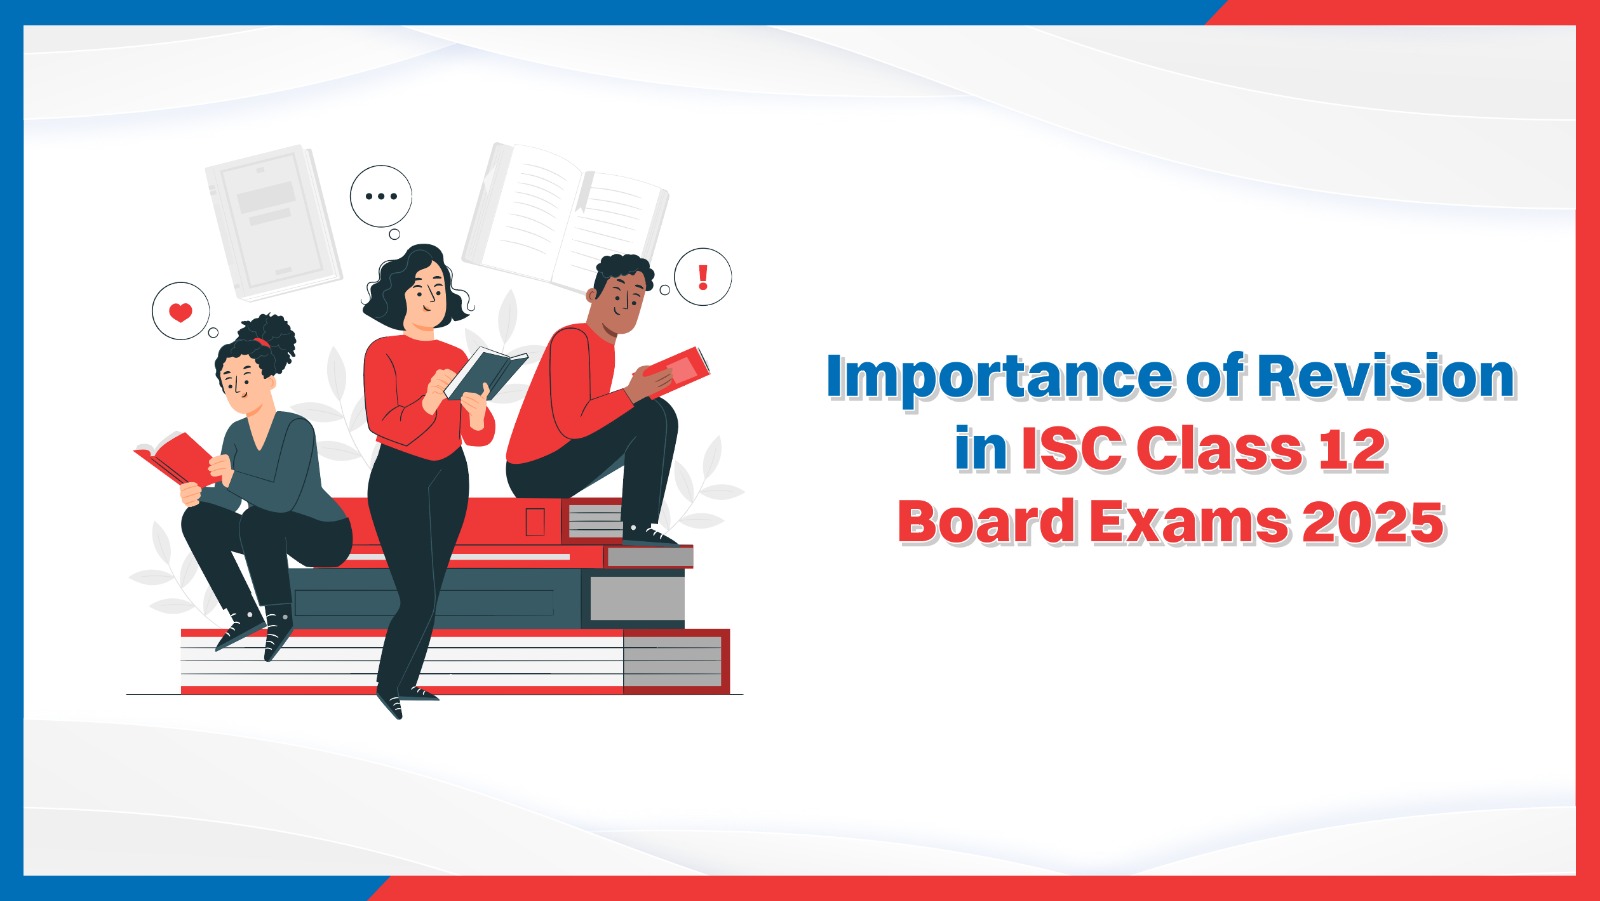 Importance of Revision in ISC Class 12 Board Exams 2025